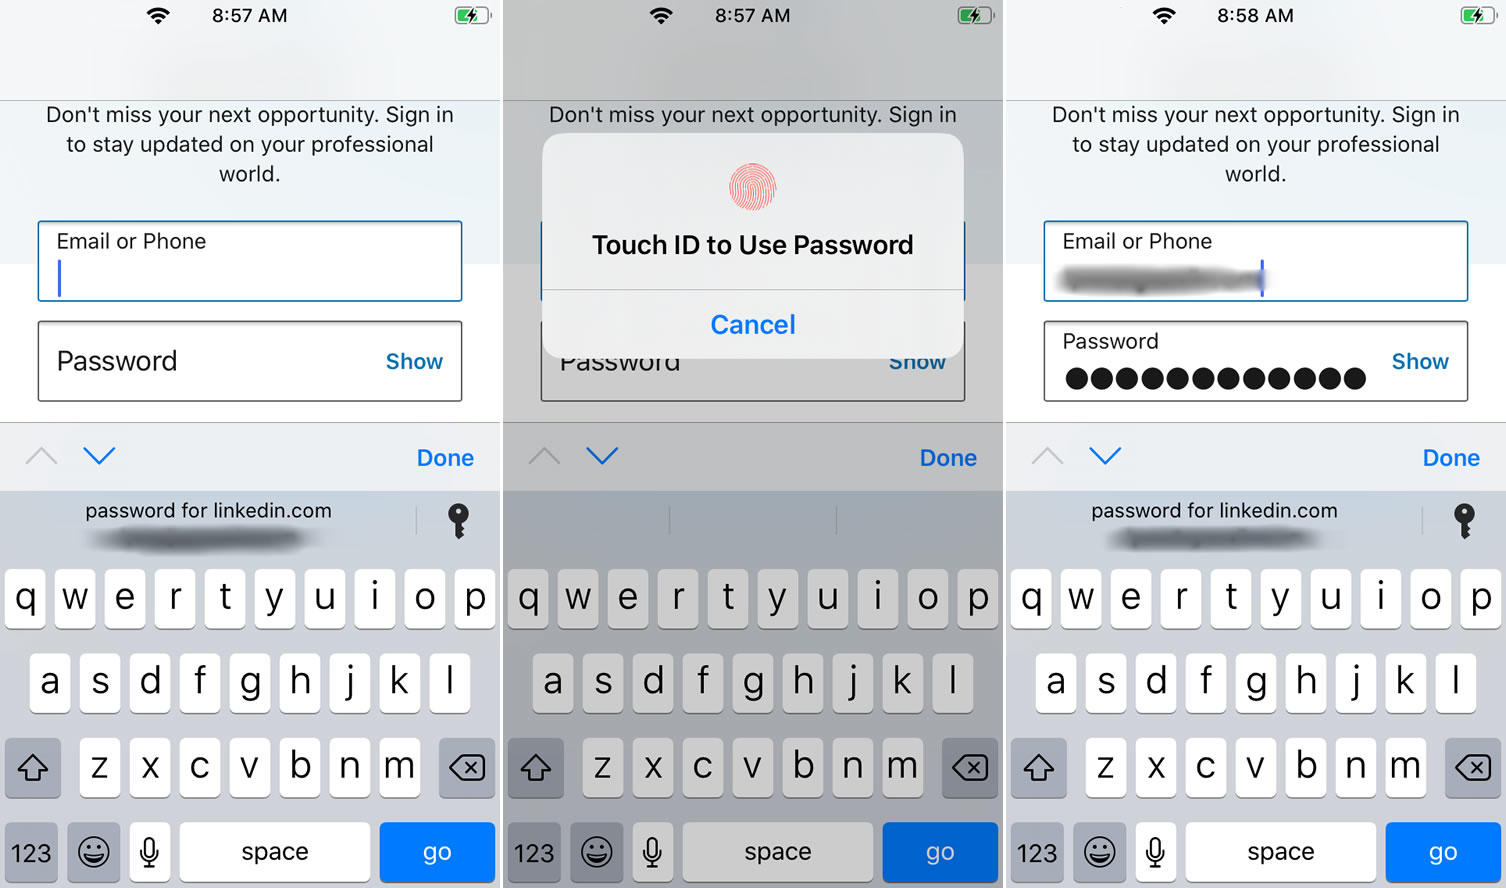 How To Use Icloud Keychain To Manage Passwords On Your Iphone Or Ipad Techrepublic - old roblox accounts and passwords